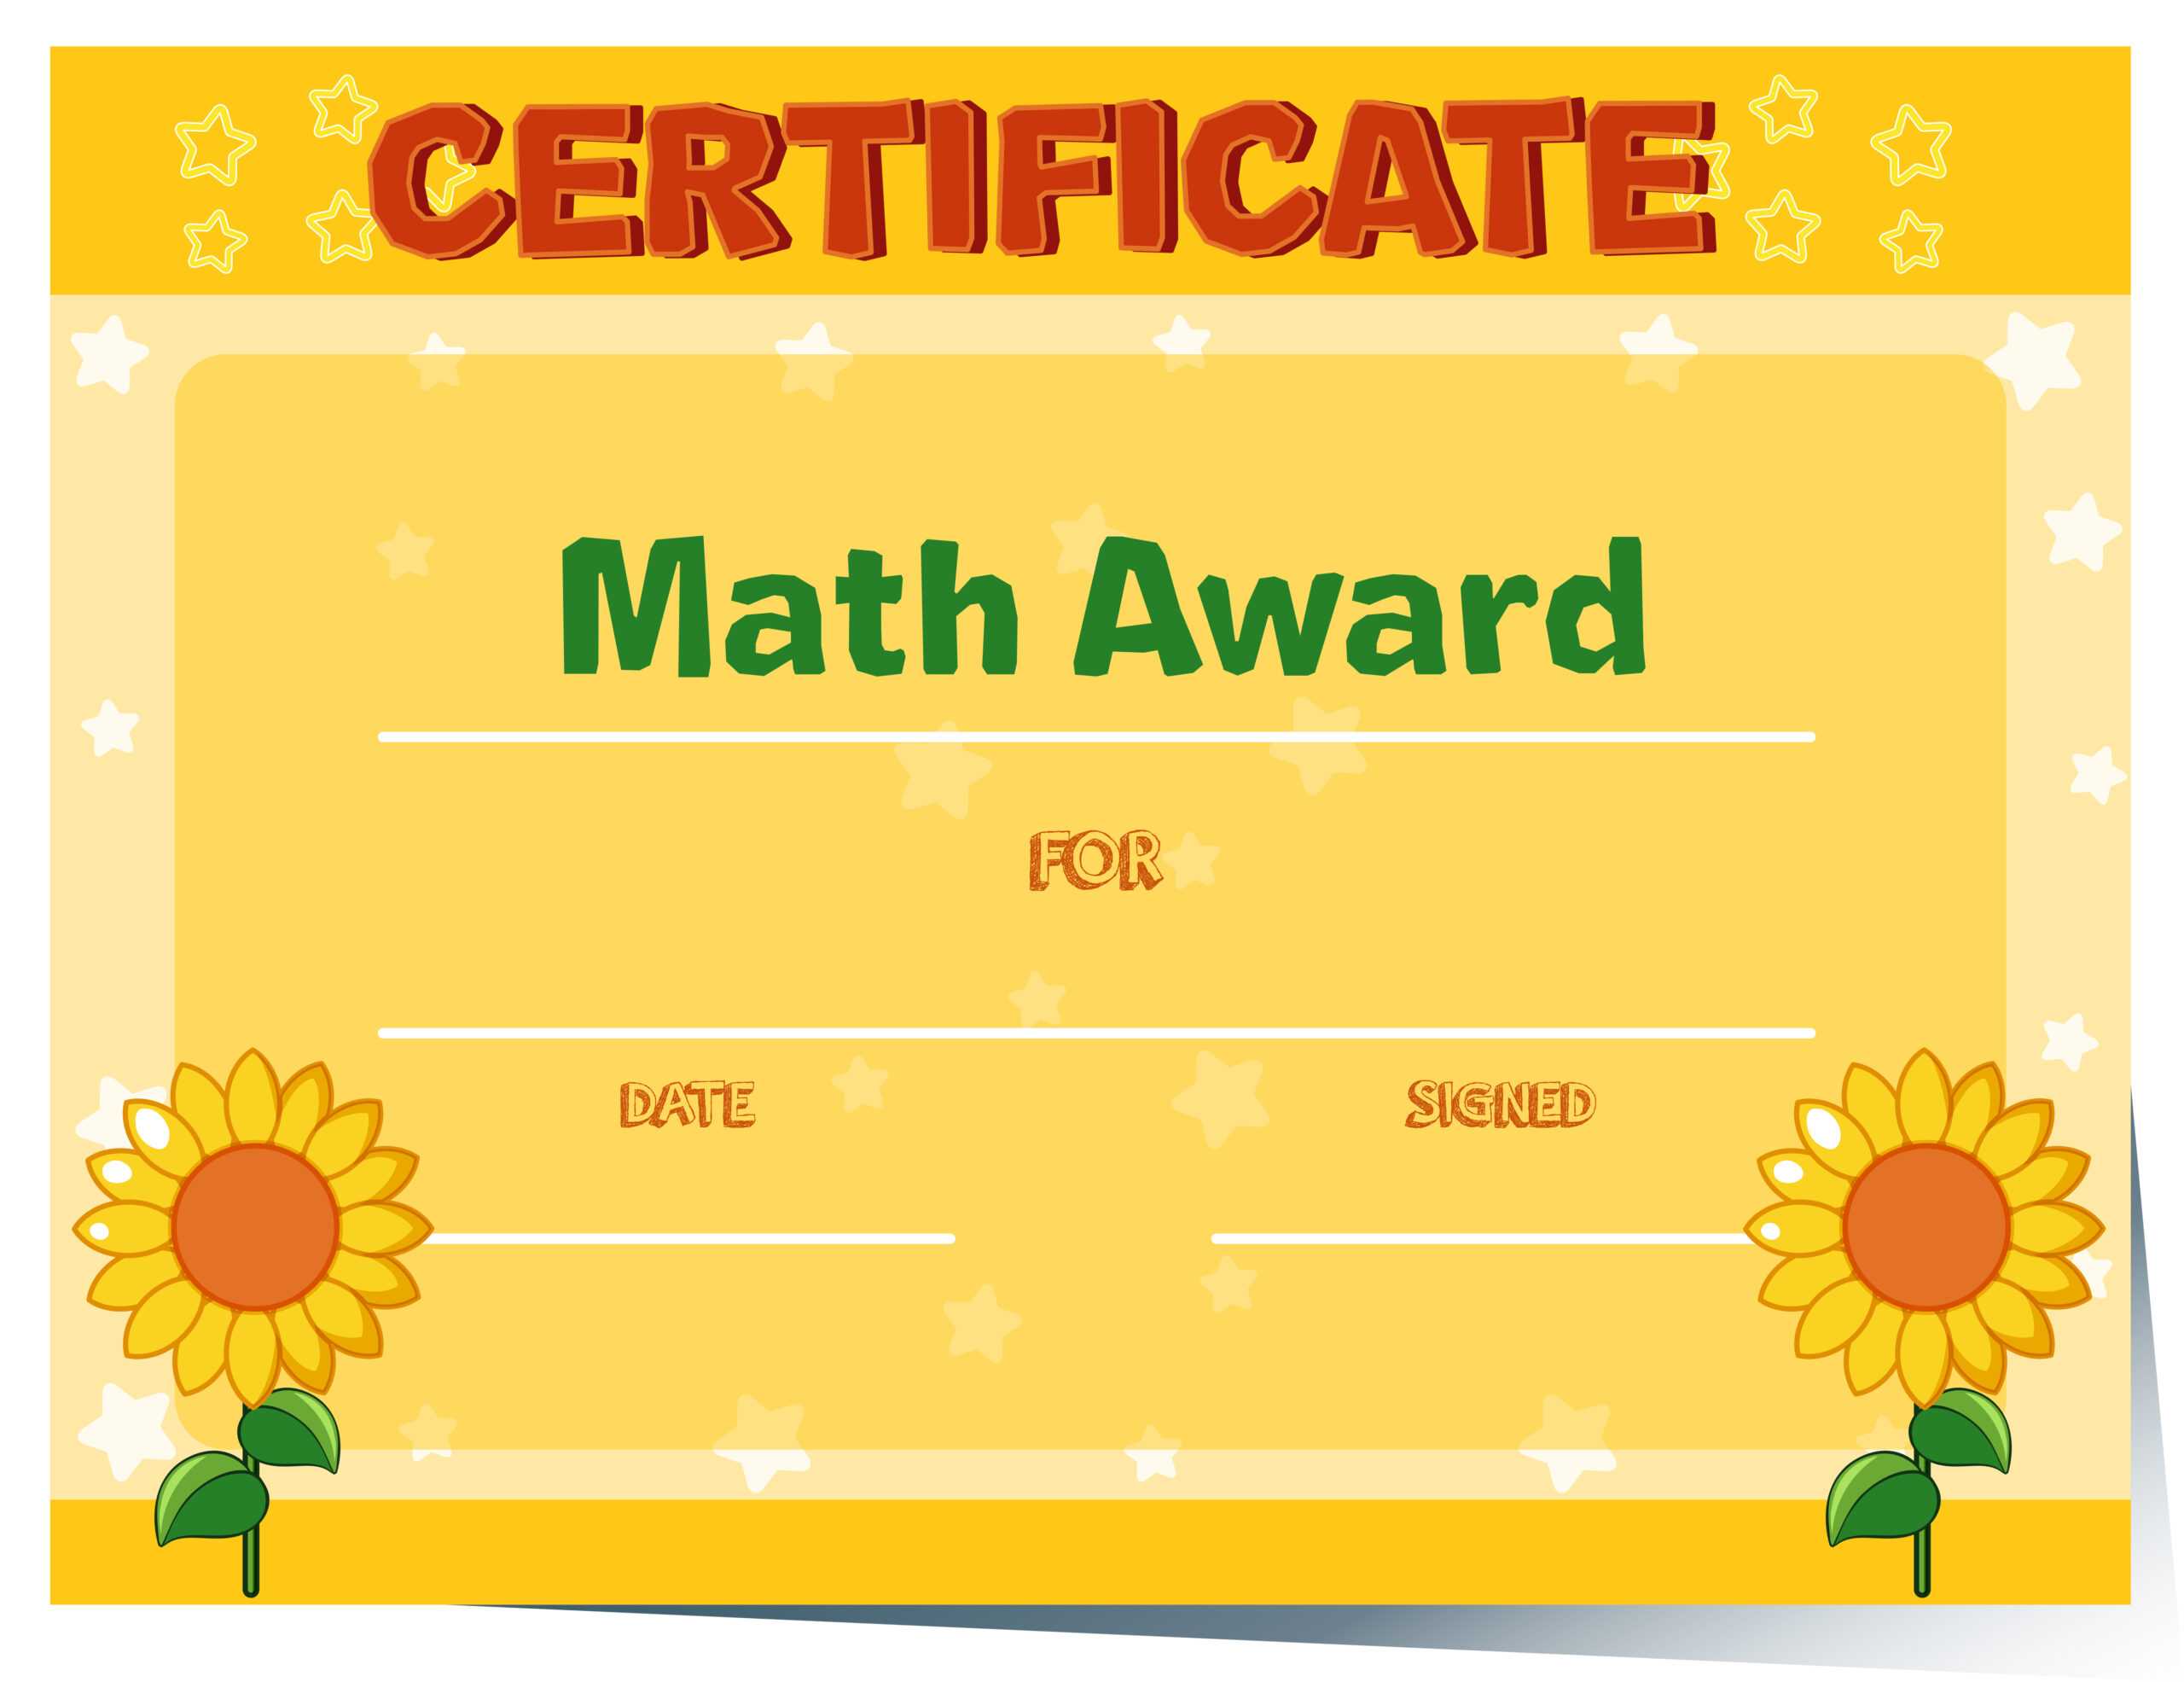 Certificate Template With Sunflowers In Background Throughout Math Certificate Template